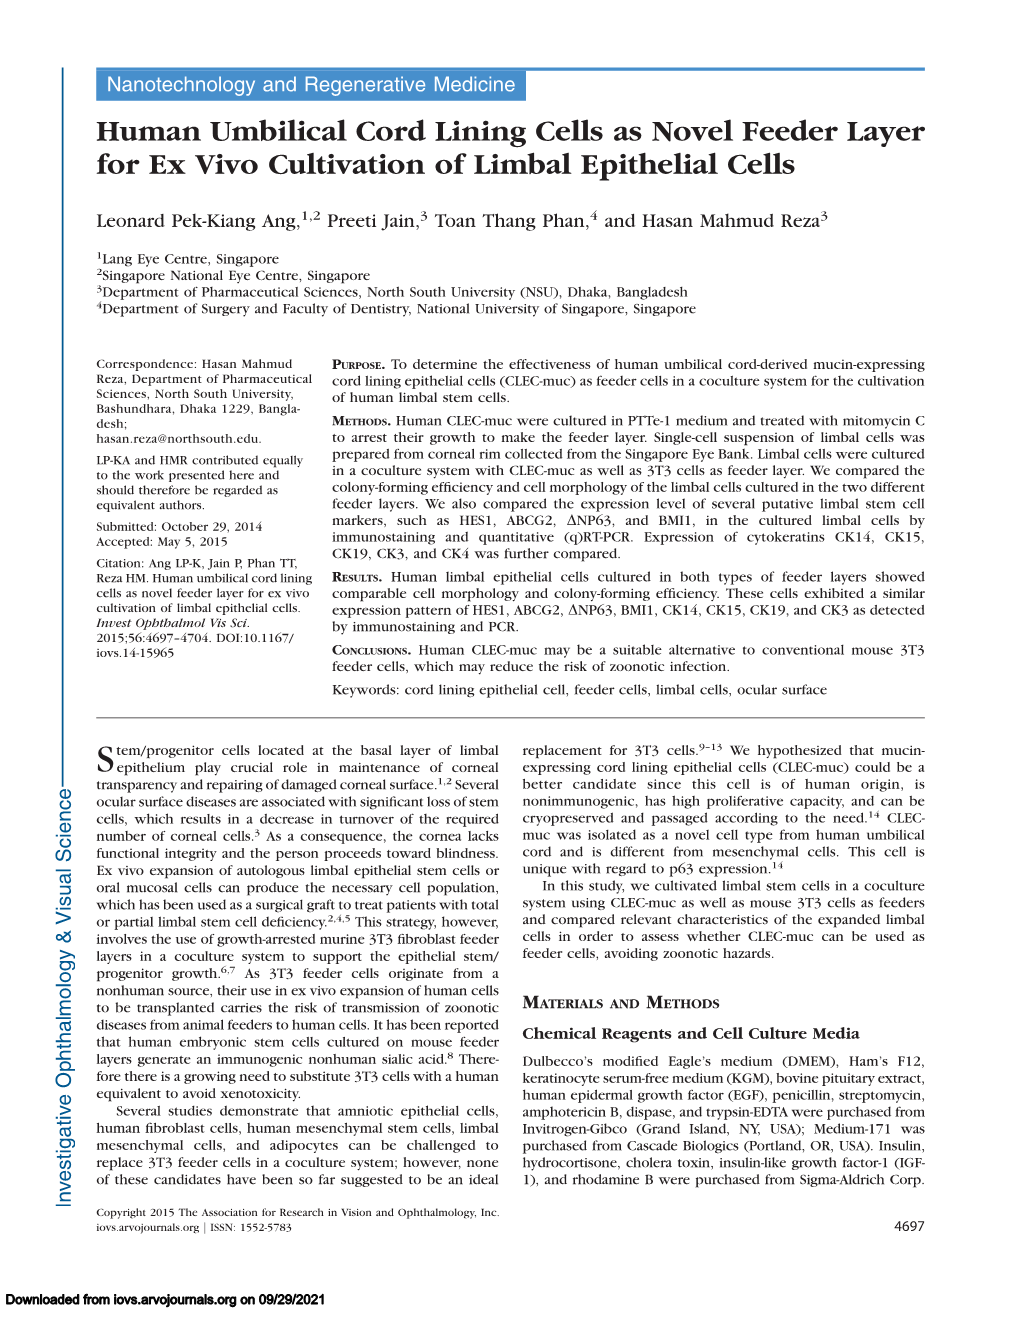 Human Umbilical Cord Lining Cells As Novel Feeder Layer for Ex Vivo Cultivation of Limbal Epithelial Cells